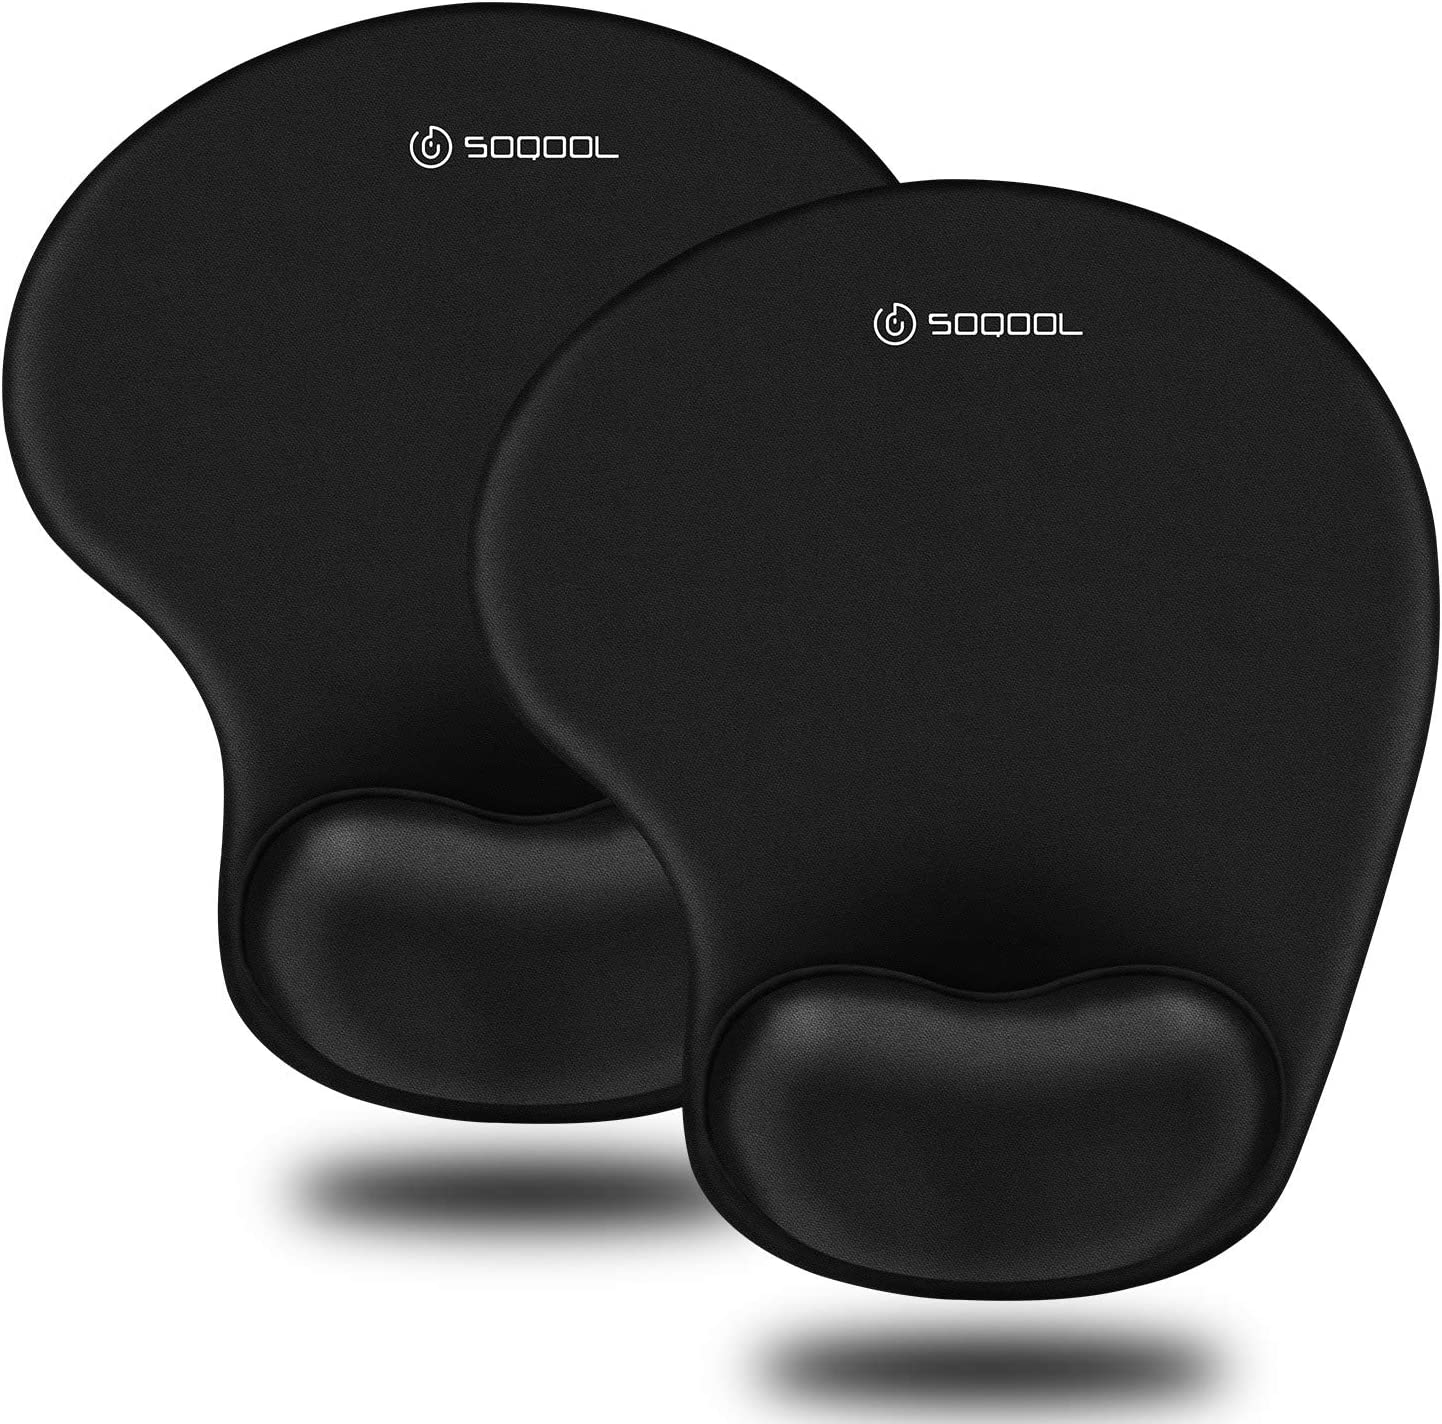 To avoid shoulder, back, and neck pain use a mousepad with a wrist rest.